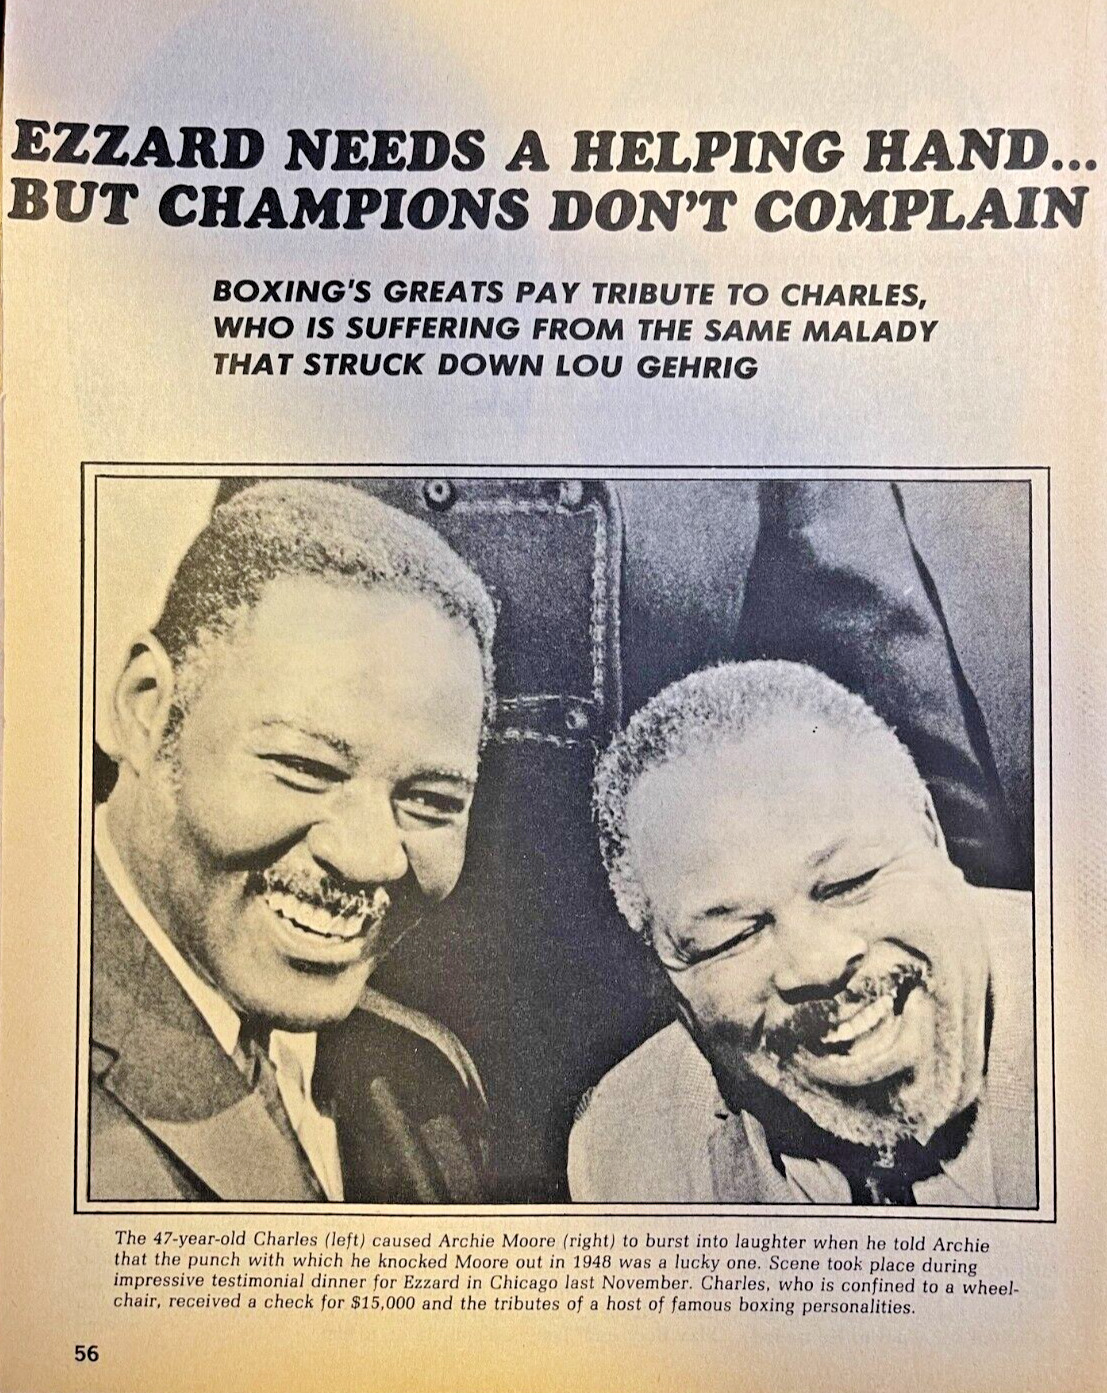 1969 Boxer Ezzard Charles Suffering From Lou Gehrig Disease